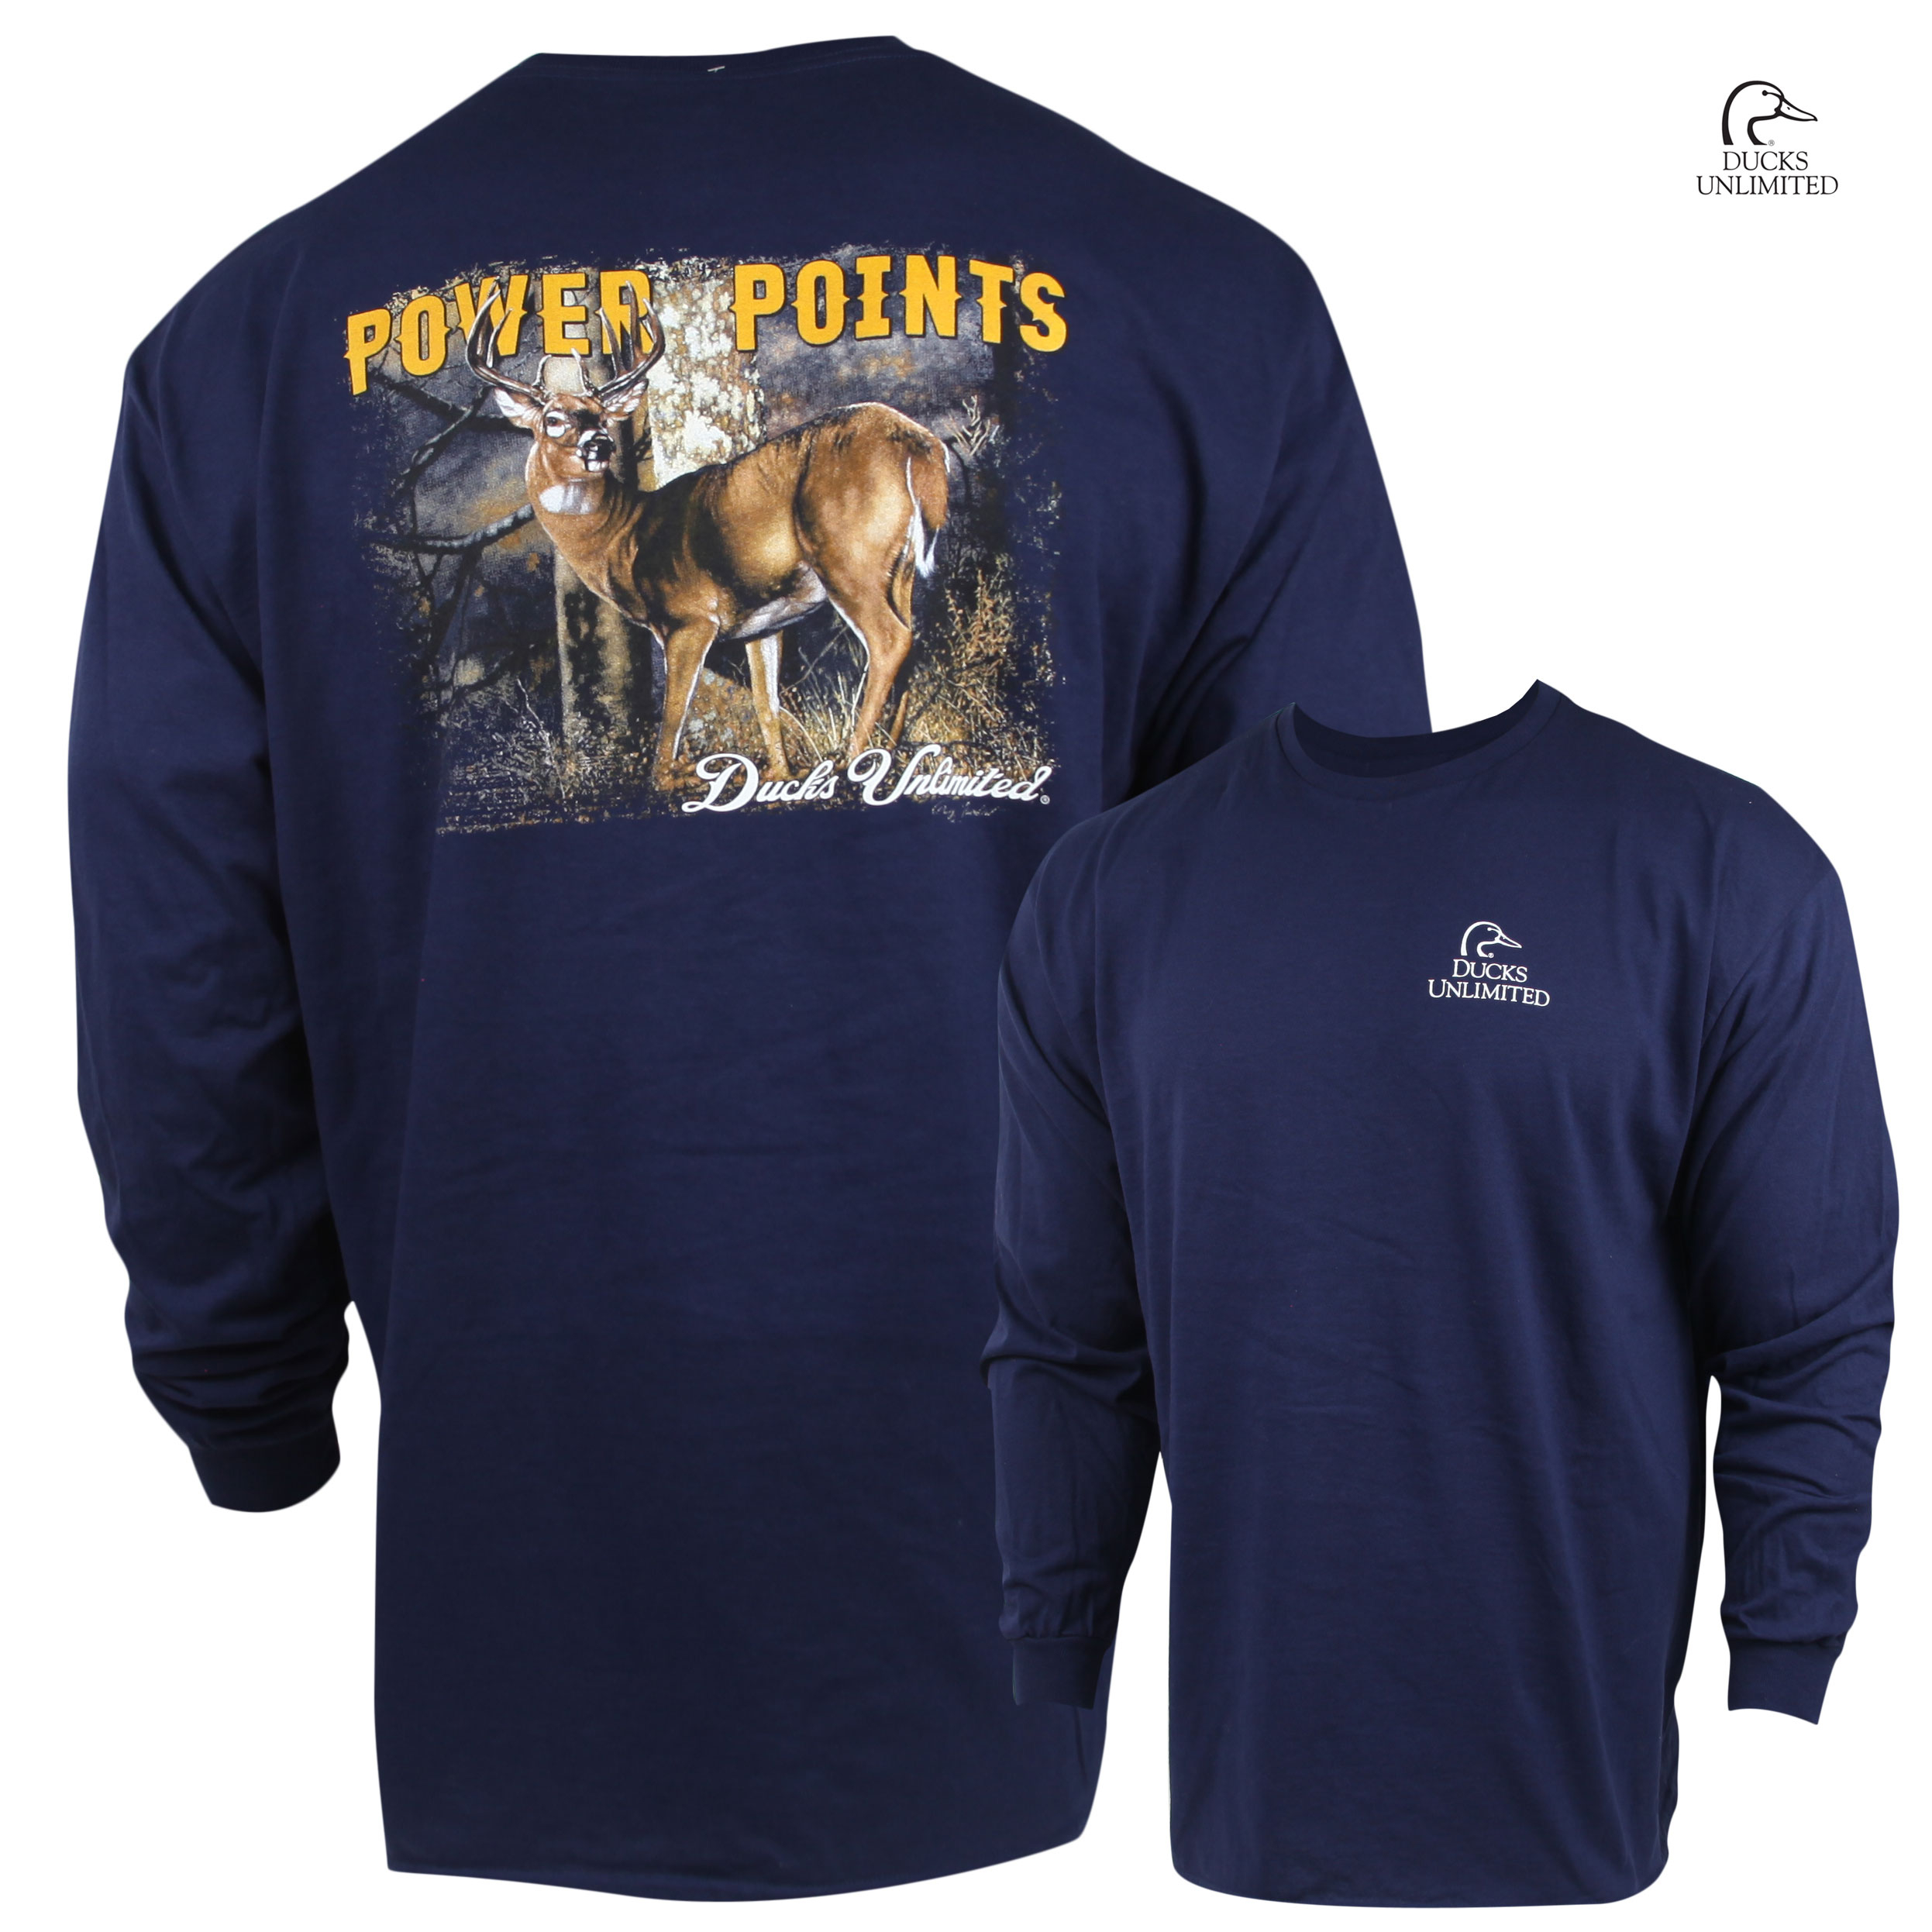 Ducks Unlimited Power Points Long-Sleeve Crew (S)